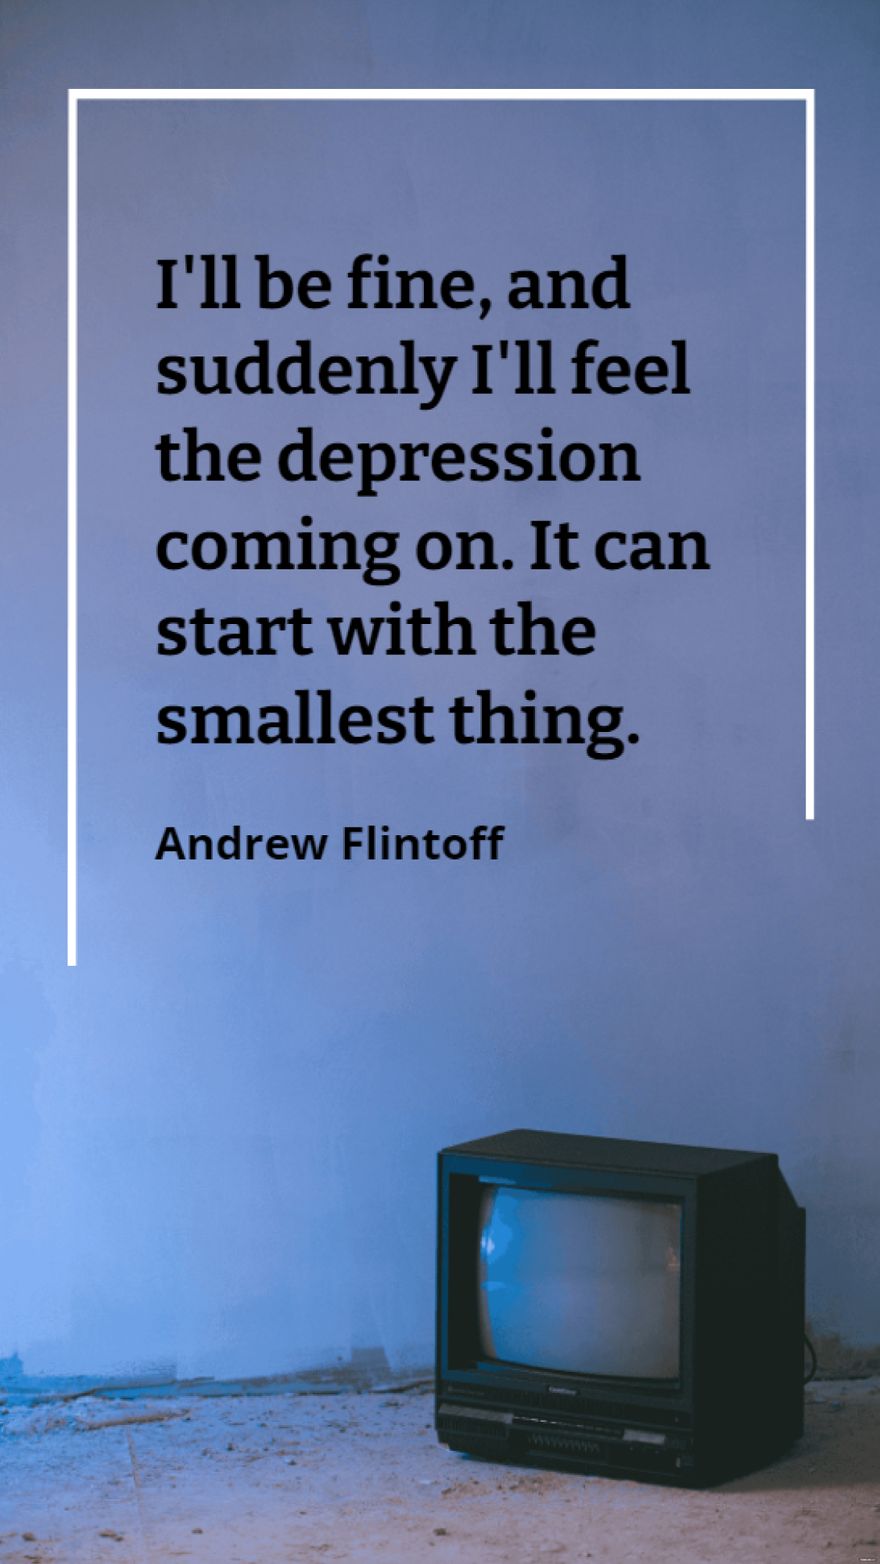 Andrew Flintoff - I'll be fine, and suddenly I'll feel the depression coming on. It can start with the smallest thing.